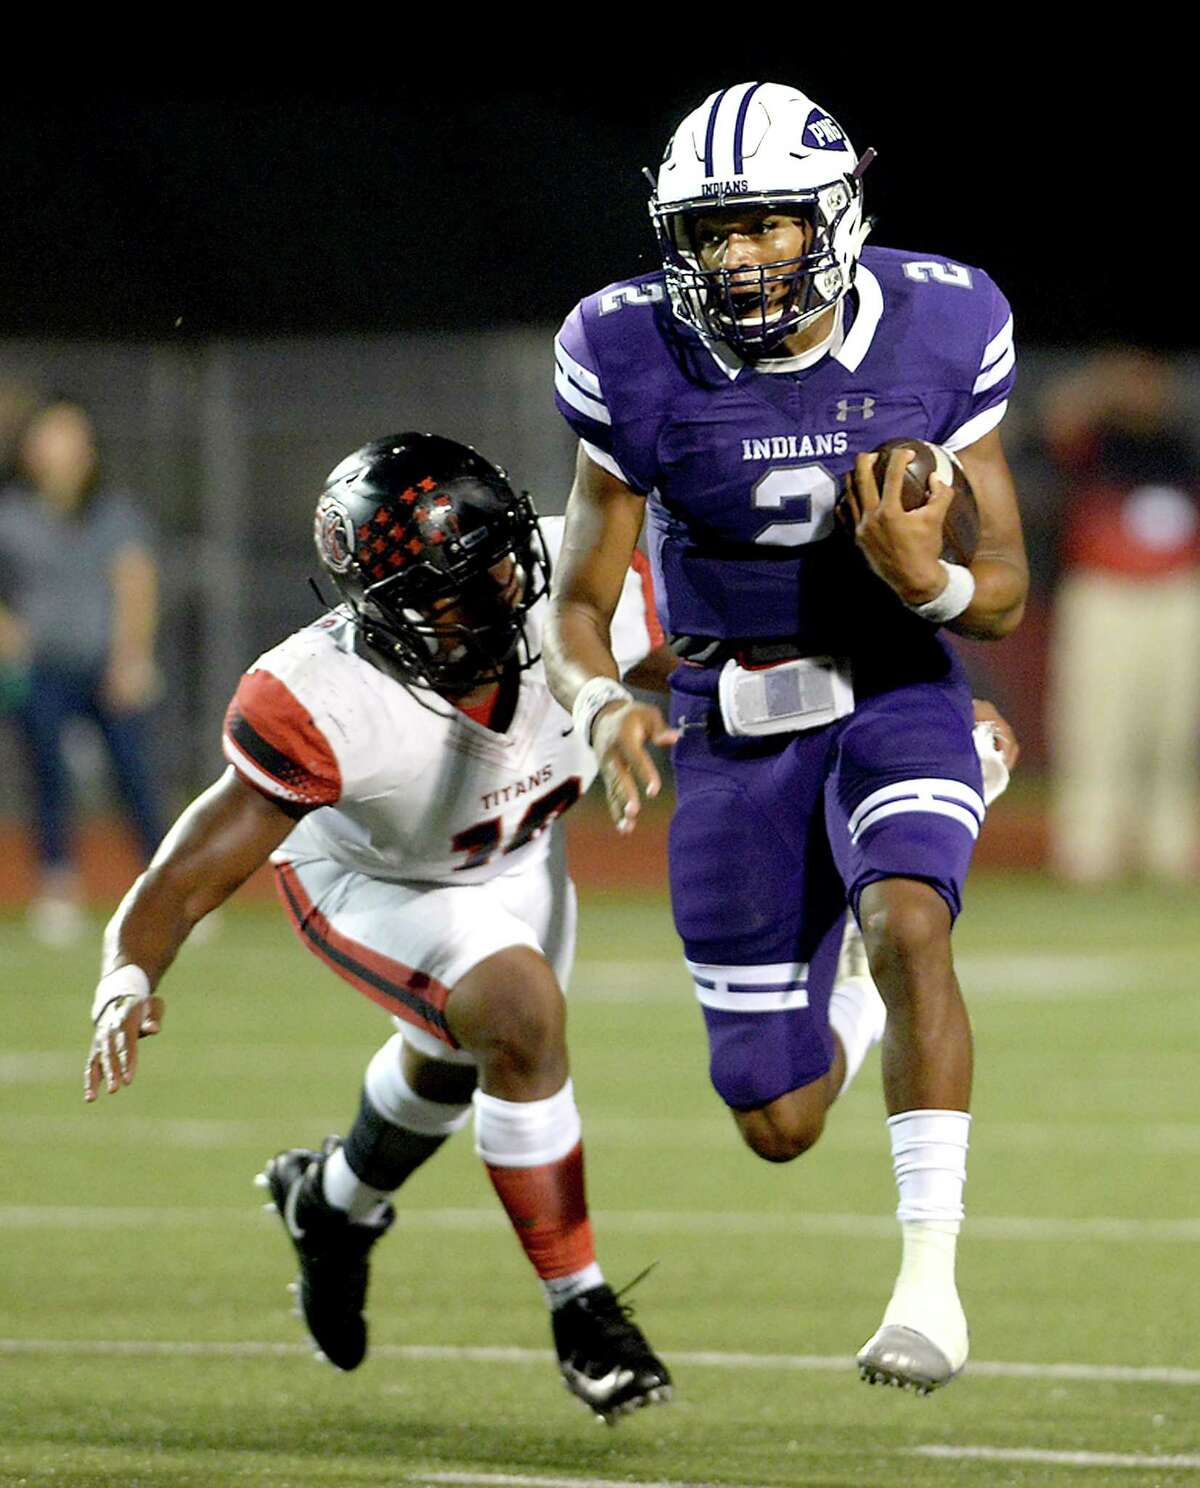 Roschon Johnson School: Port Neches-Groves Position: QB Johnson threw for 212 yards, rushed for 126 yards, had 43 receiving yards and totaled five touchdowns in the Indians’ 44-36 victory over Port Arthur Memorial.